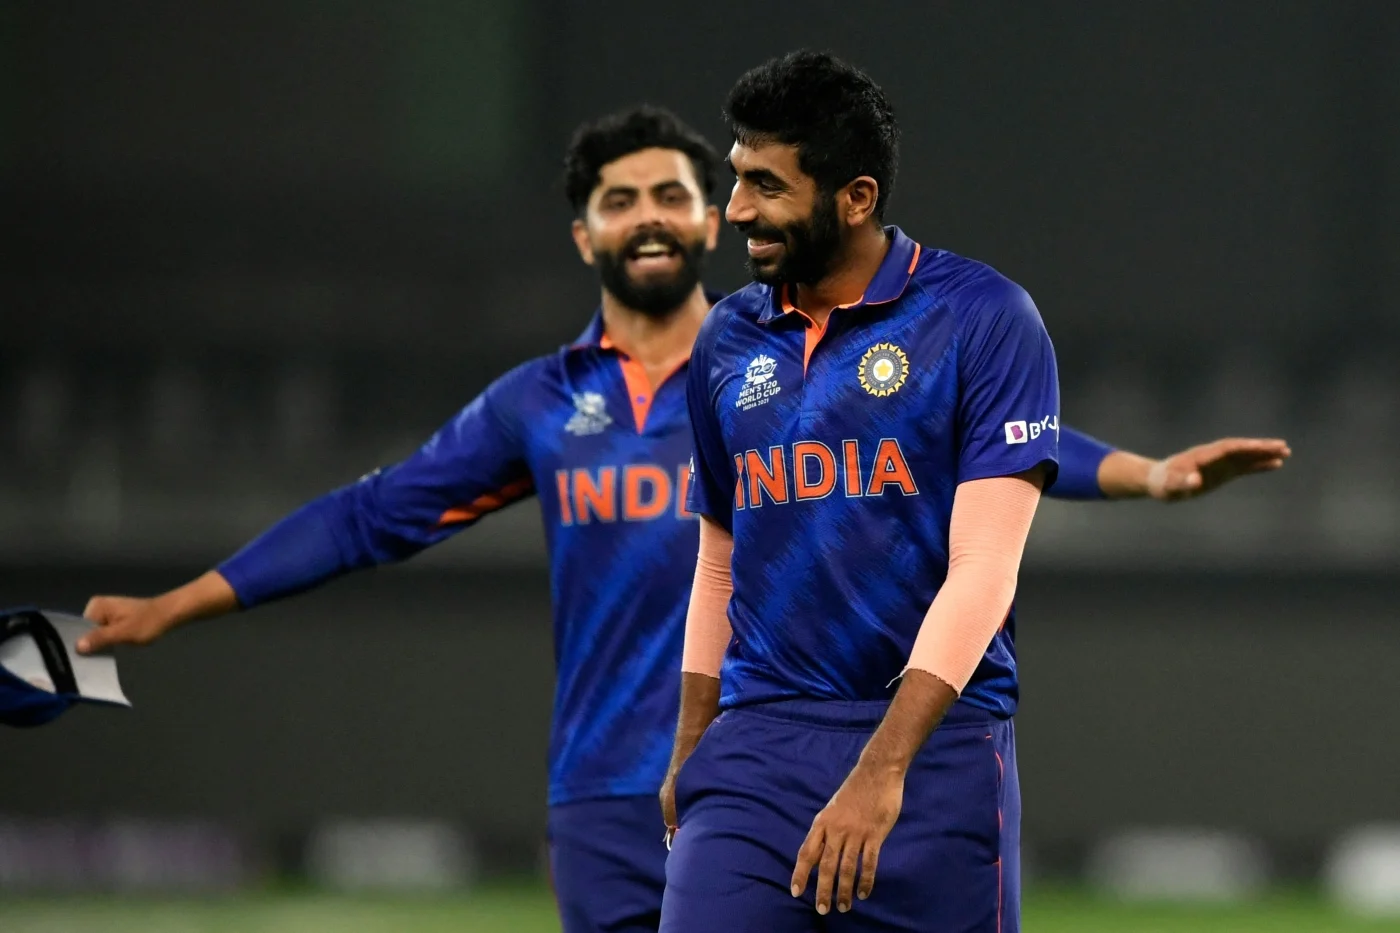 Breaking: Jasprit Bumrah ruled out of the T20 World Cup